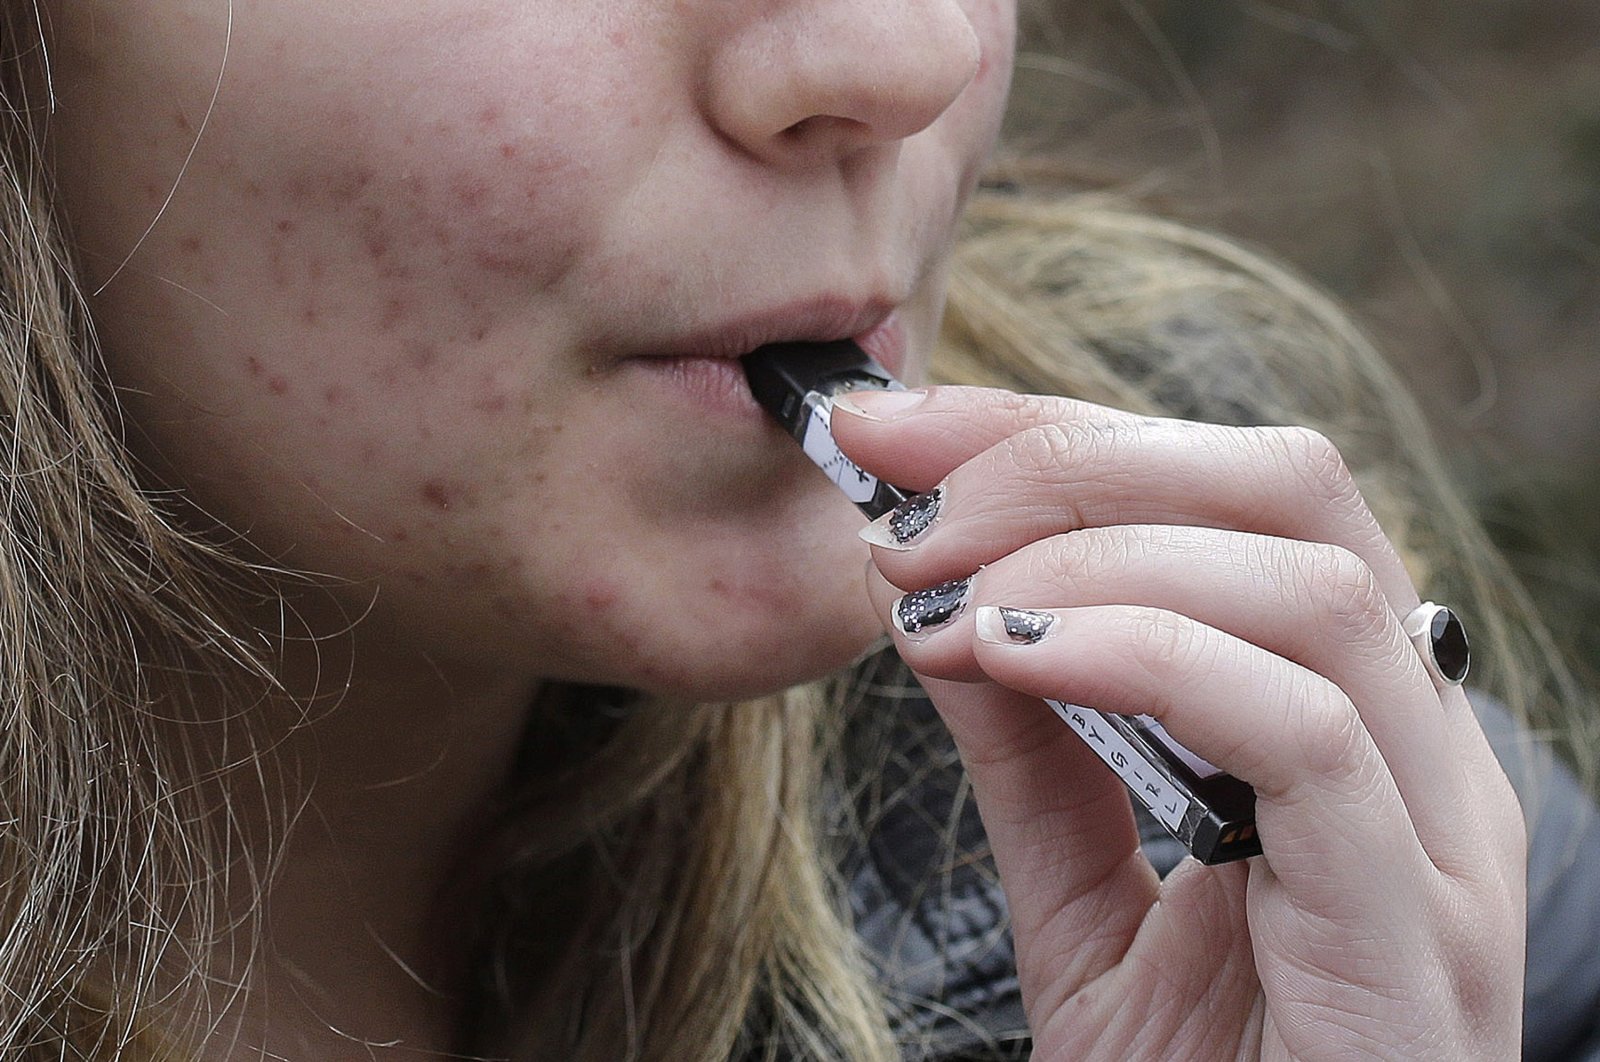 After a smoking ban in public places in 2009, Turkey recently imposed a ban on the sale and export of electronic cigarettes, which are considered just as harmful as smoked tobacco. (AP PHOTO)